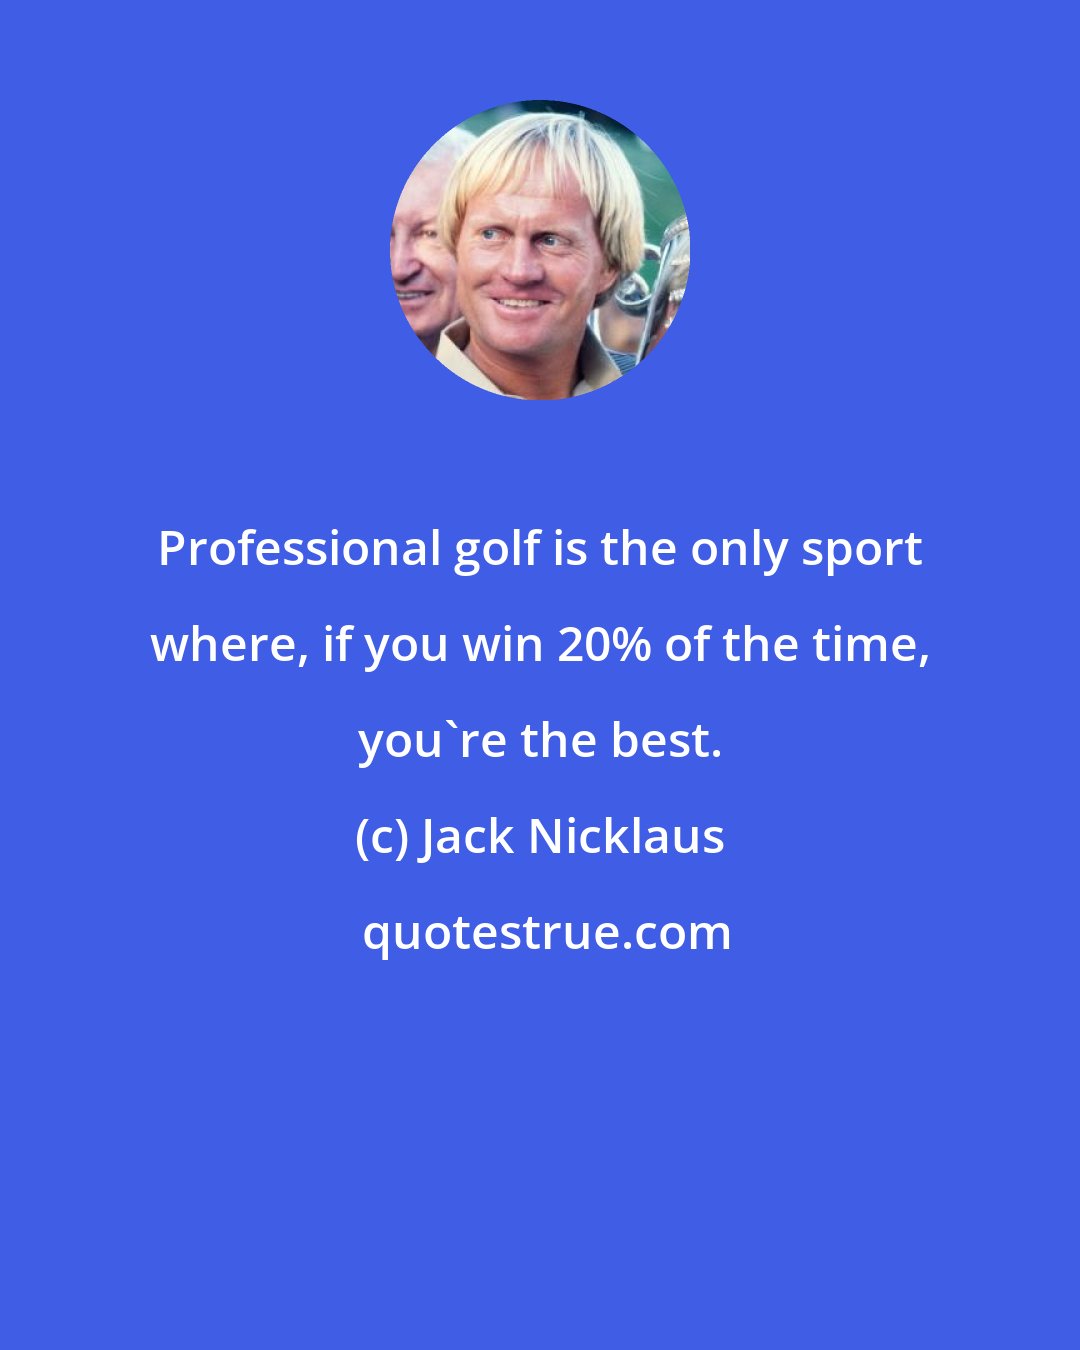 Jack Nicklaus: Professional golf is the only sport where, if you win 20% of the time, you're the best.